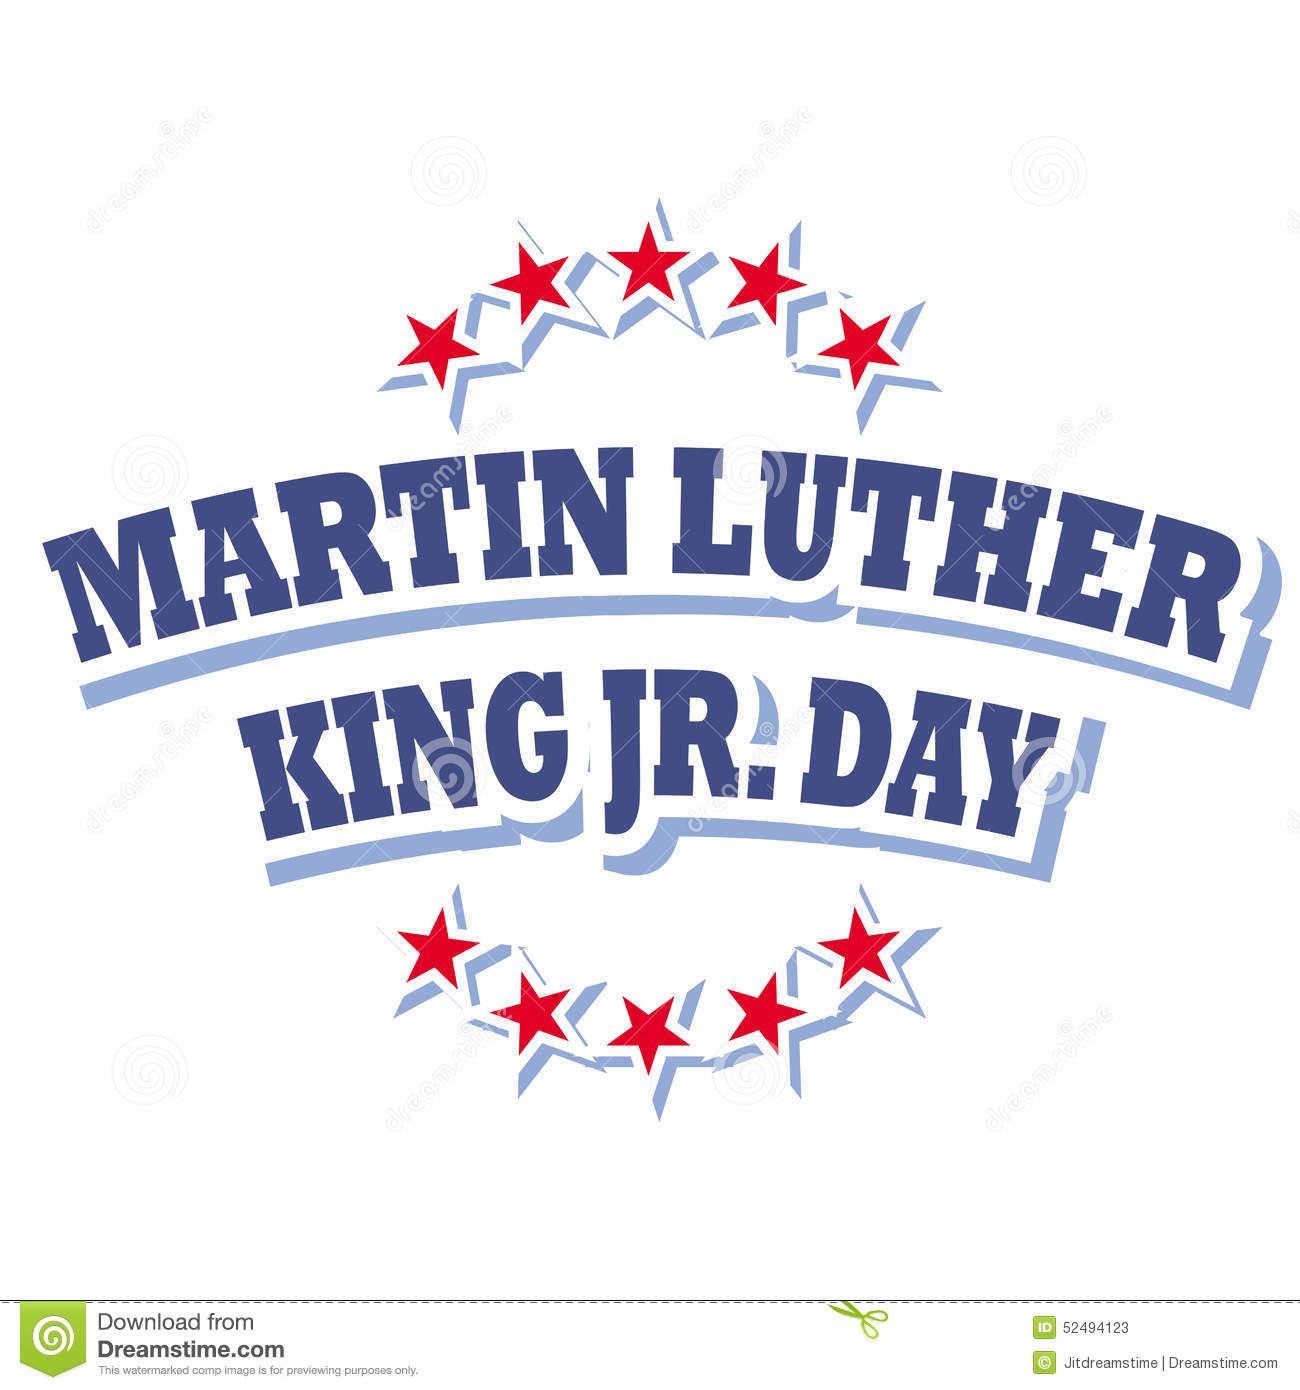 Wiki Pedia Martin Luther King Day Martin Luther King Jr Day Clip Art